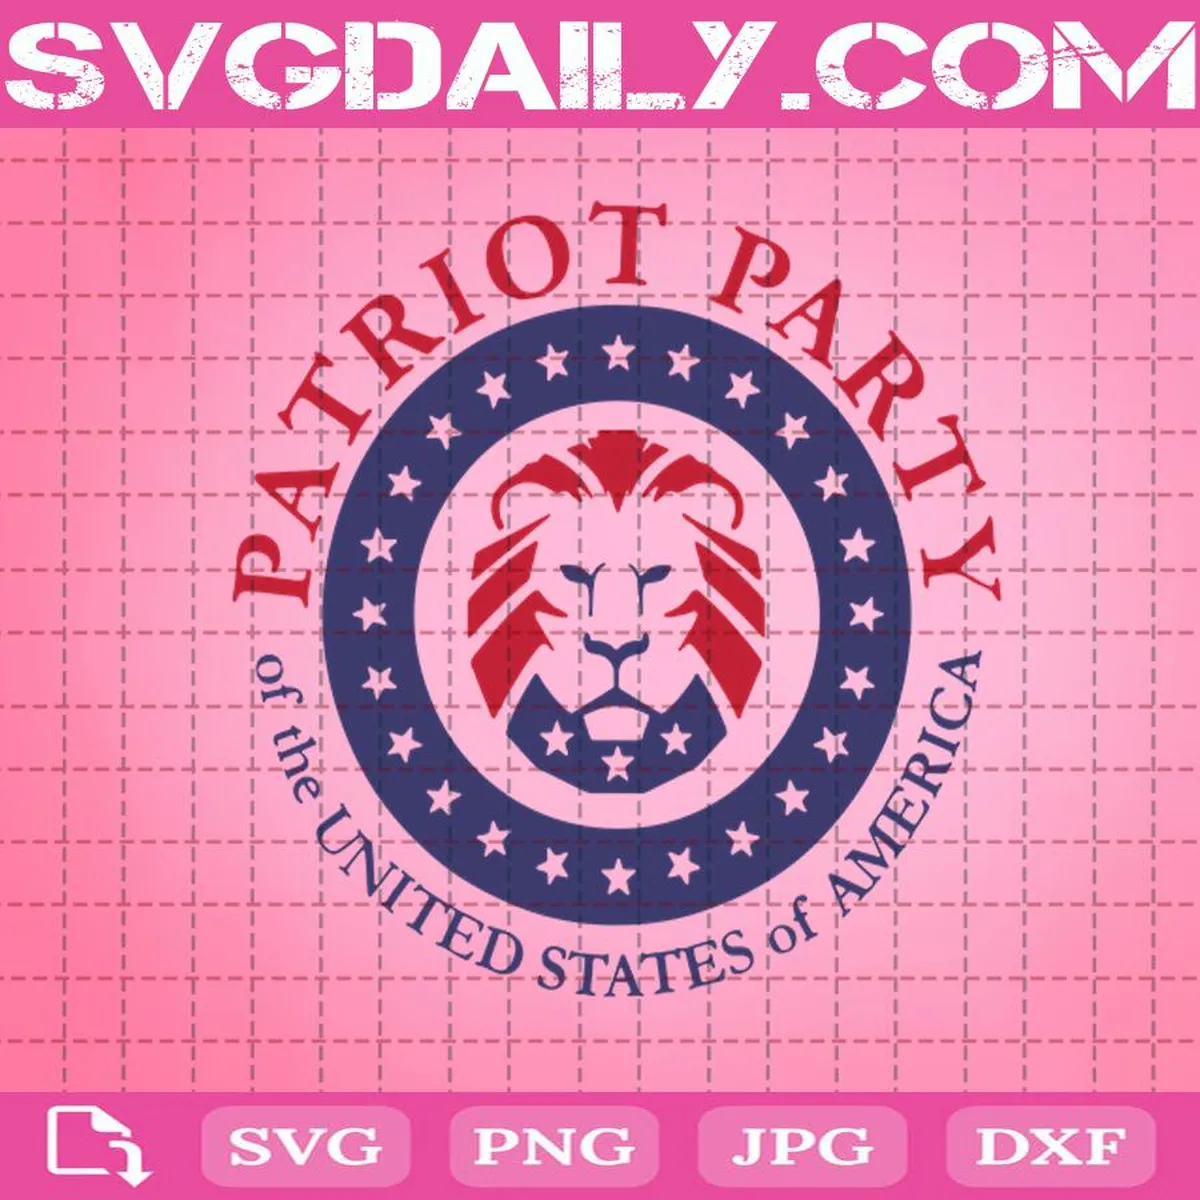 Patriot Party Of The United States Of America Svg, Party Of America Svg, Lion Party Svg, America Svg, Patriot Party Svg